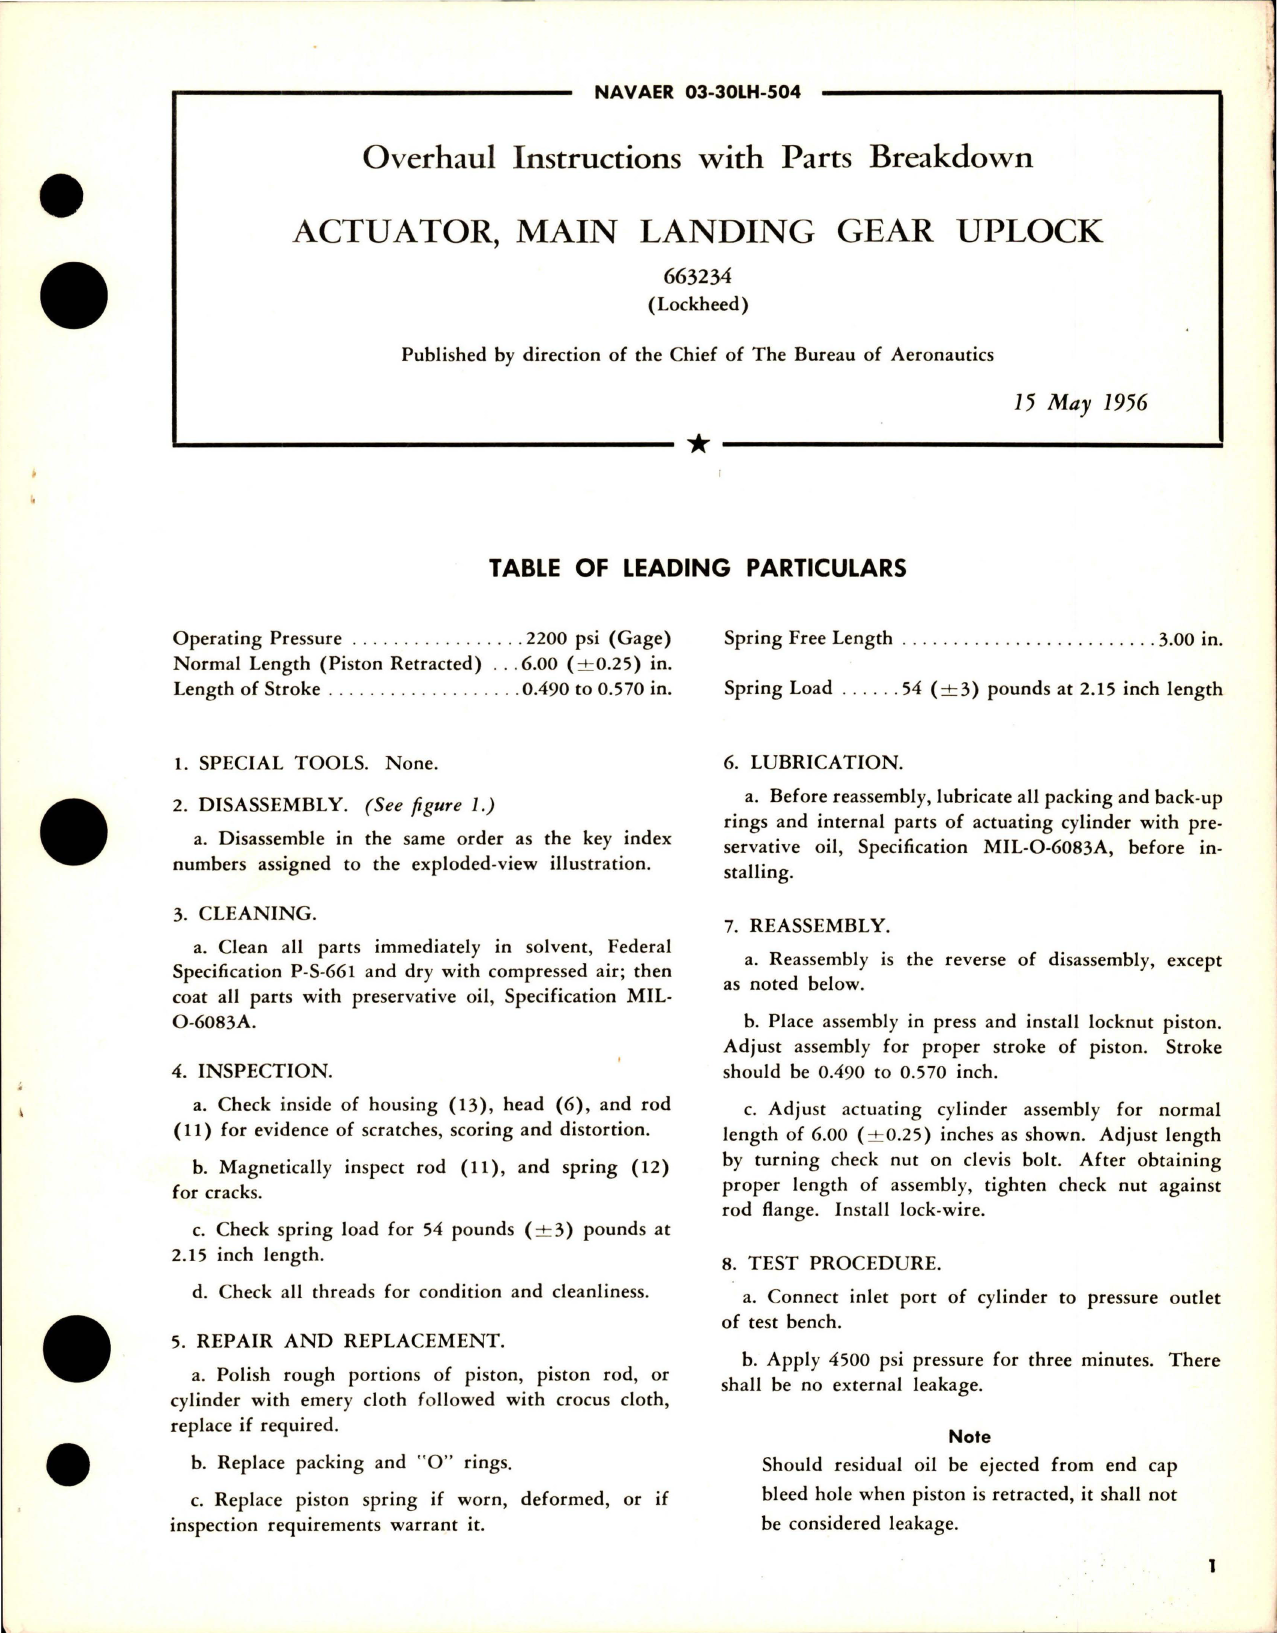 Sample page 1 from AirCorps Library document: Overhaul Instructions with Parts Breakdown for Main Landing Gear Uplock Actuator - 663234